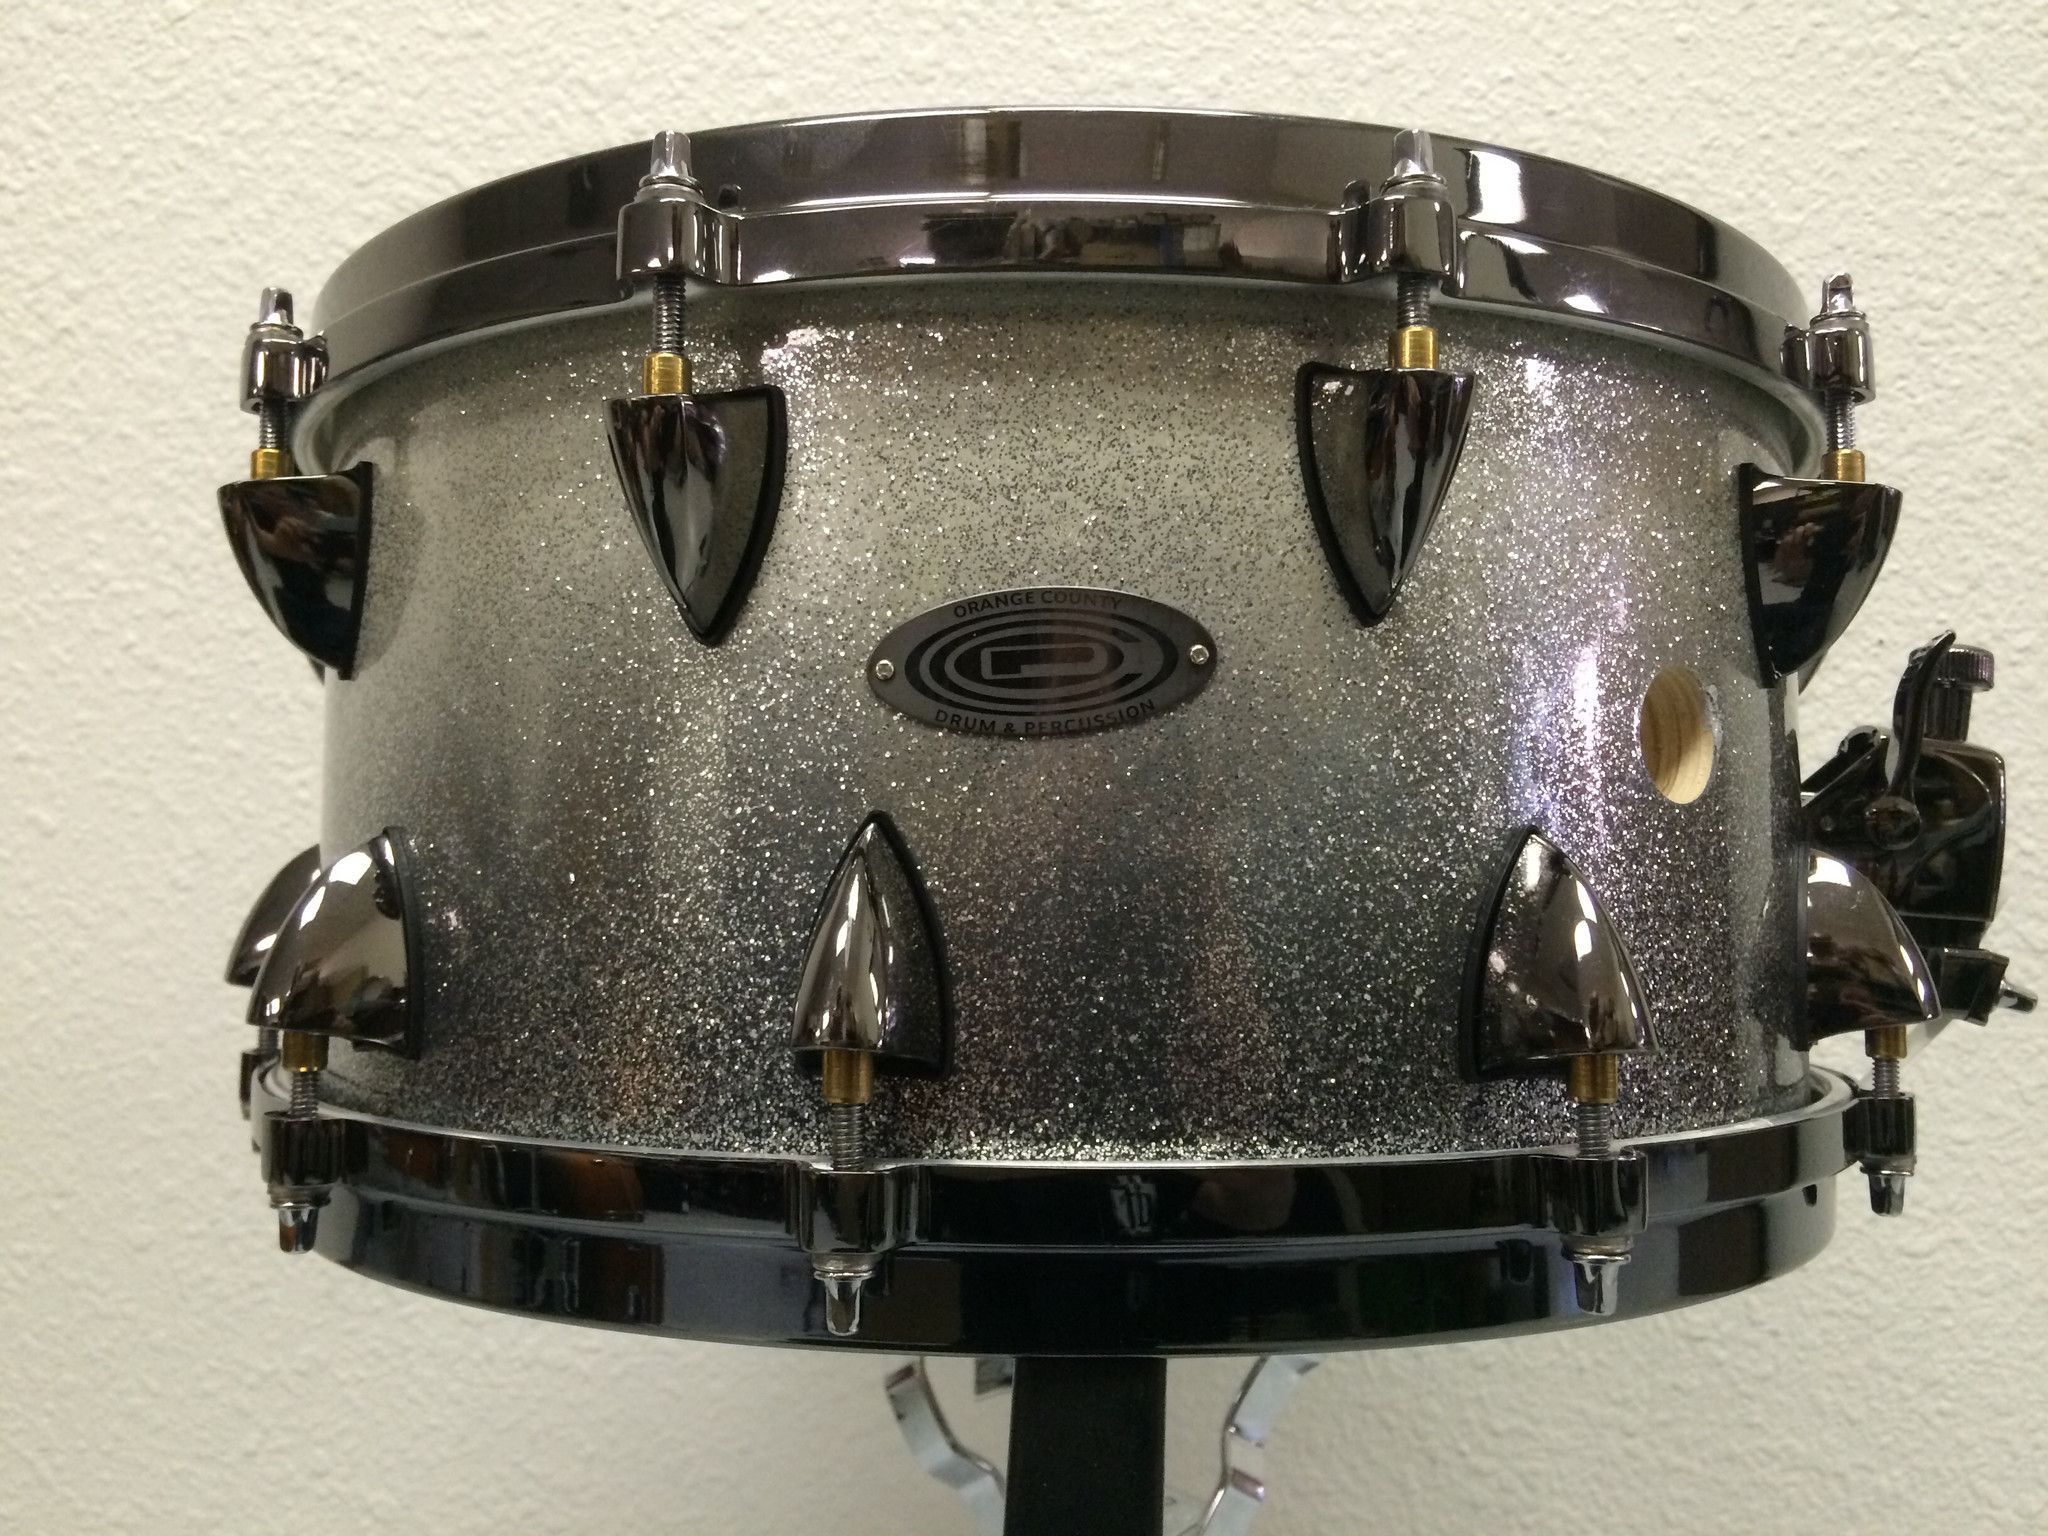 Ocdp 25ply Silver Burst Snare Drum Used Excellent